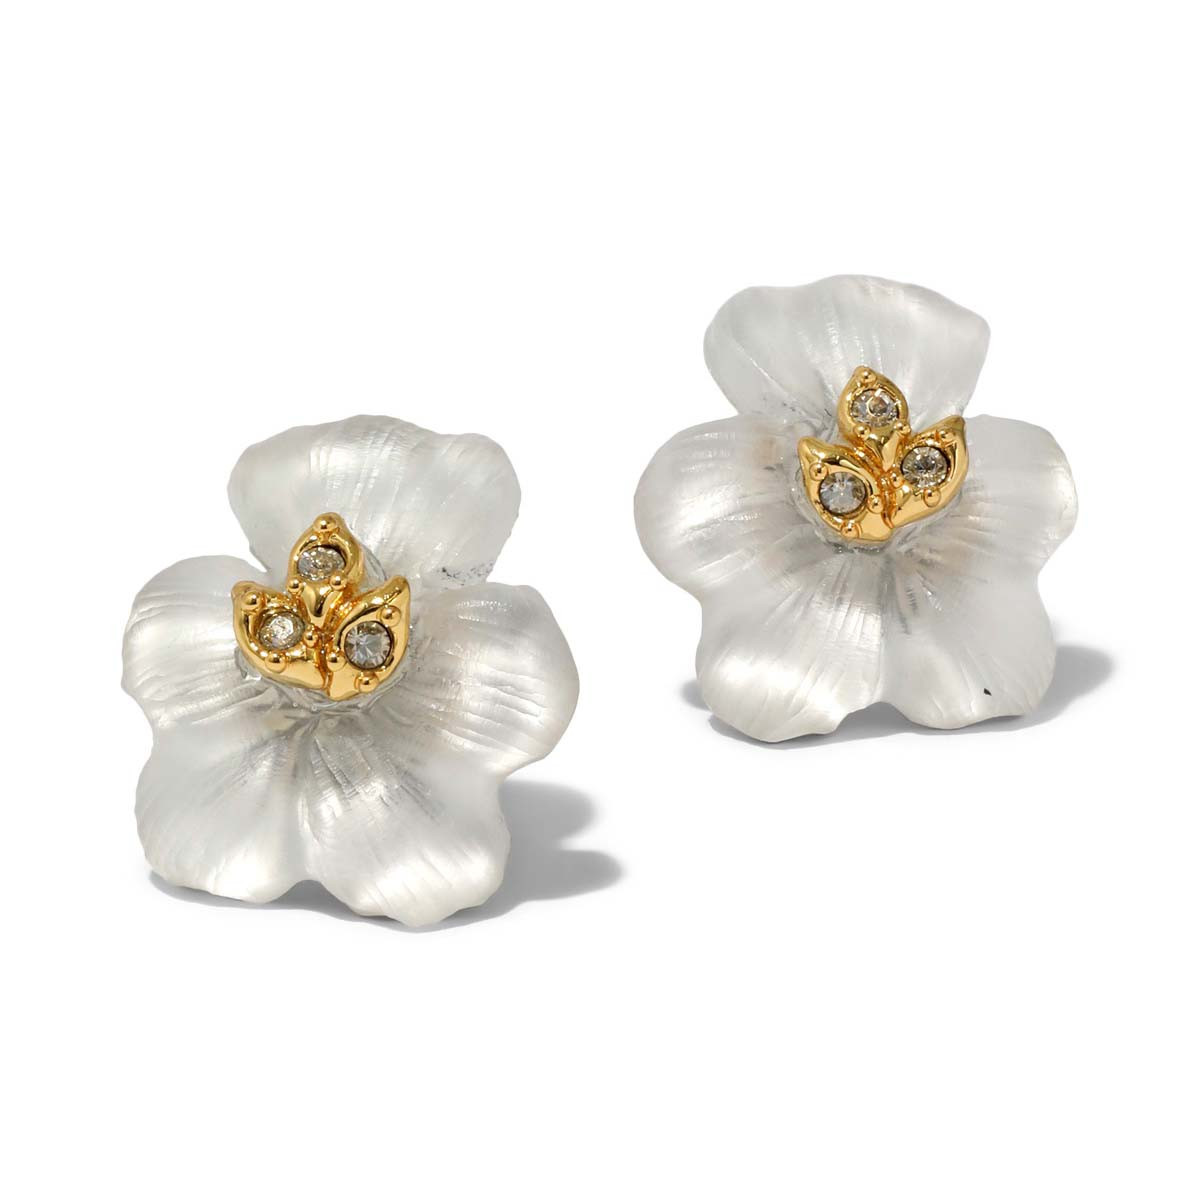 White Pansy Lucite Studs, Alexis Bittar, tomfoolery